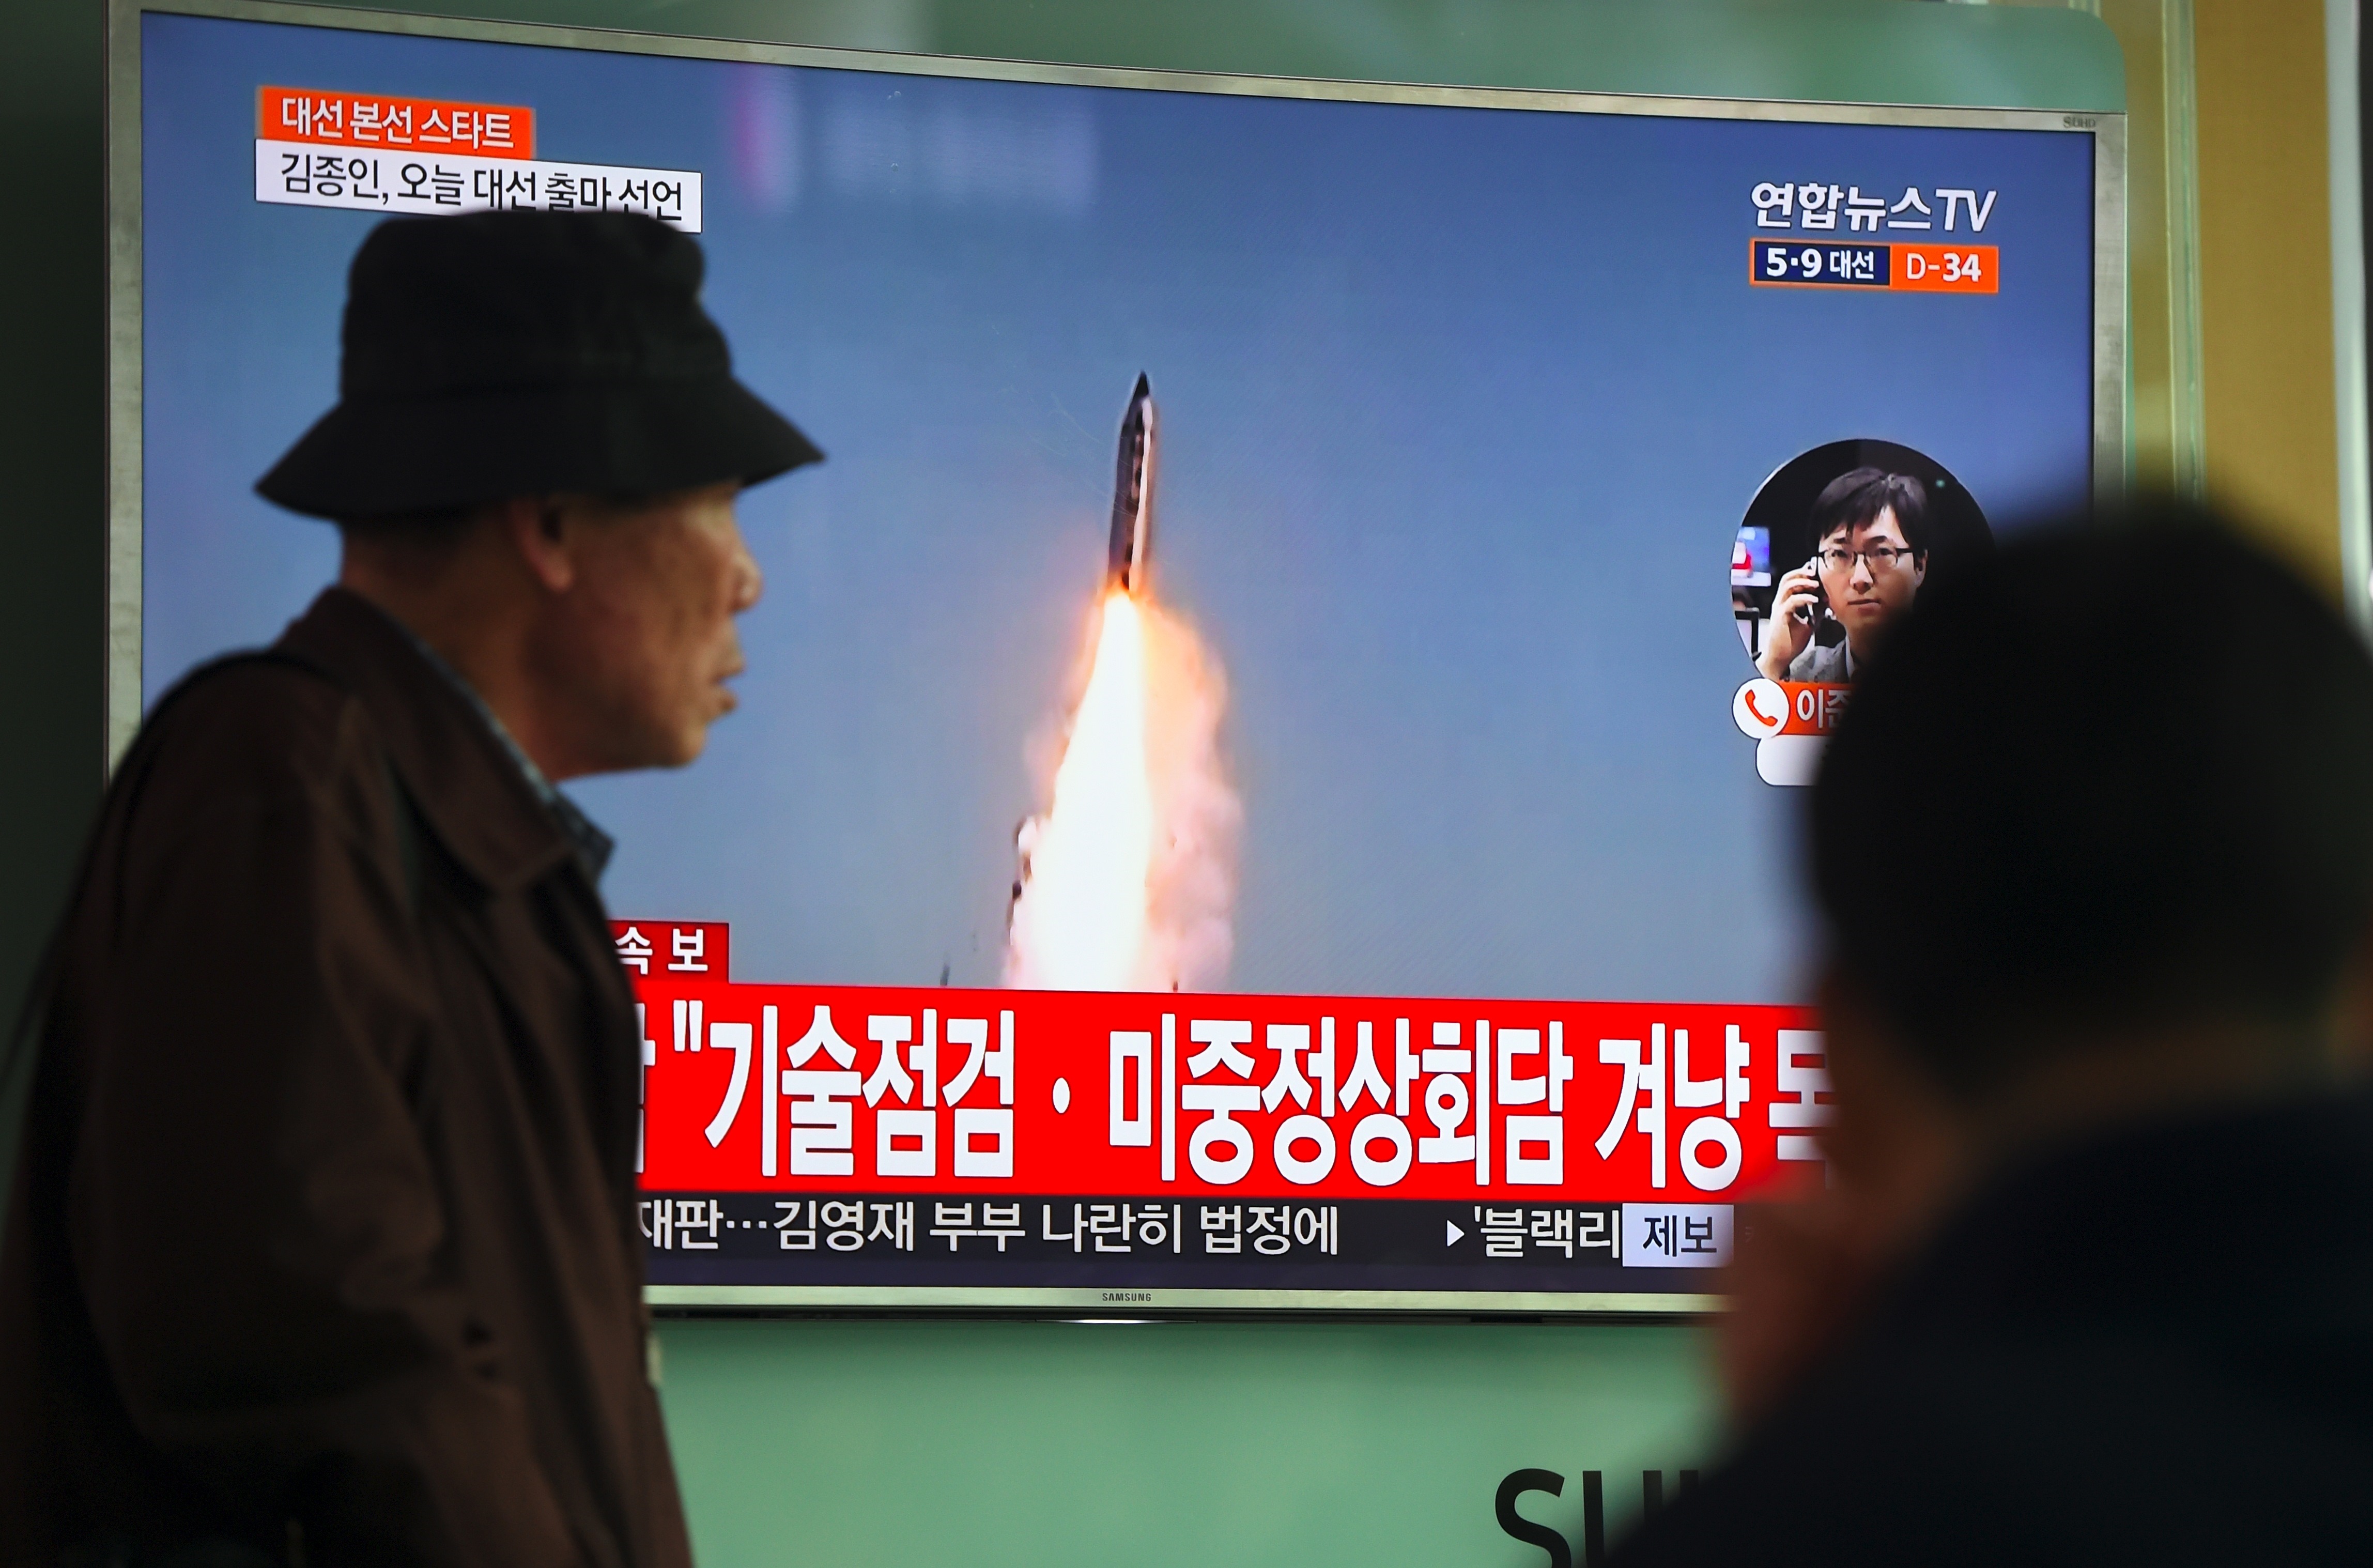 File footage of a North Korean missile launch, at a railway station in Seoul on April 5, 2017 (Jung Yeon-Je—AFP/Getty Images)